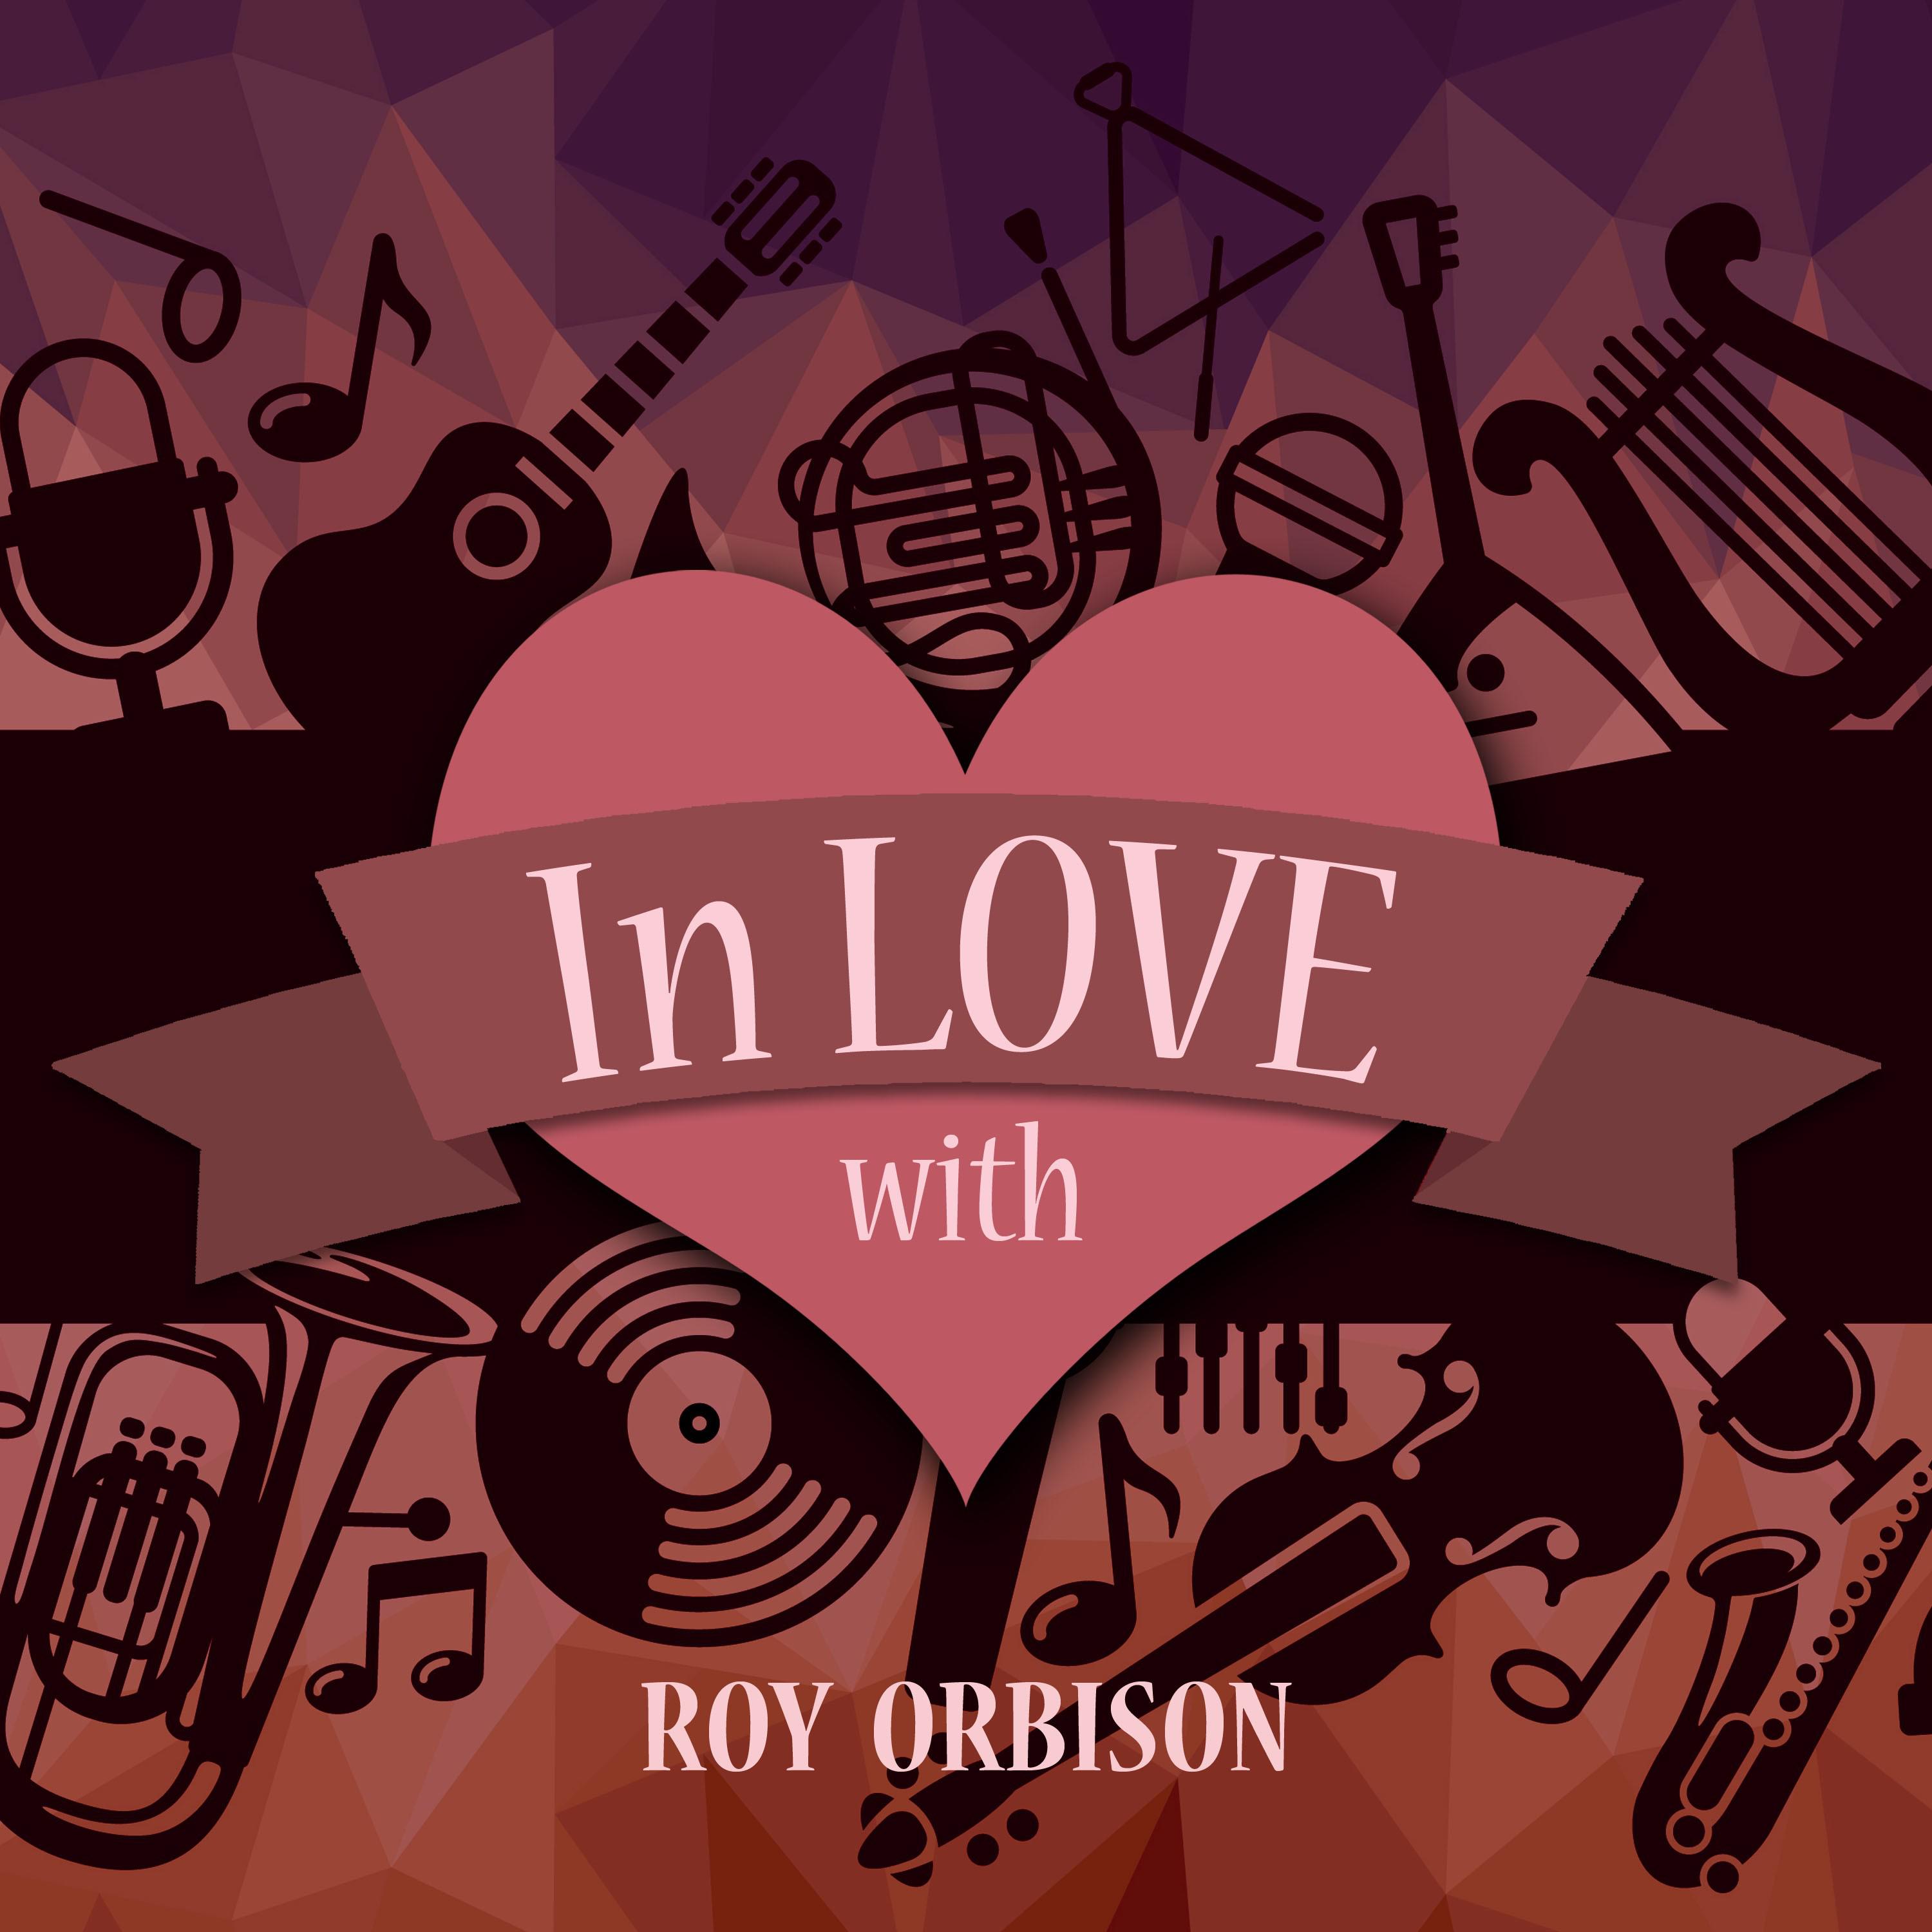 In Love with Roy Orbison